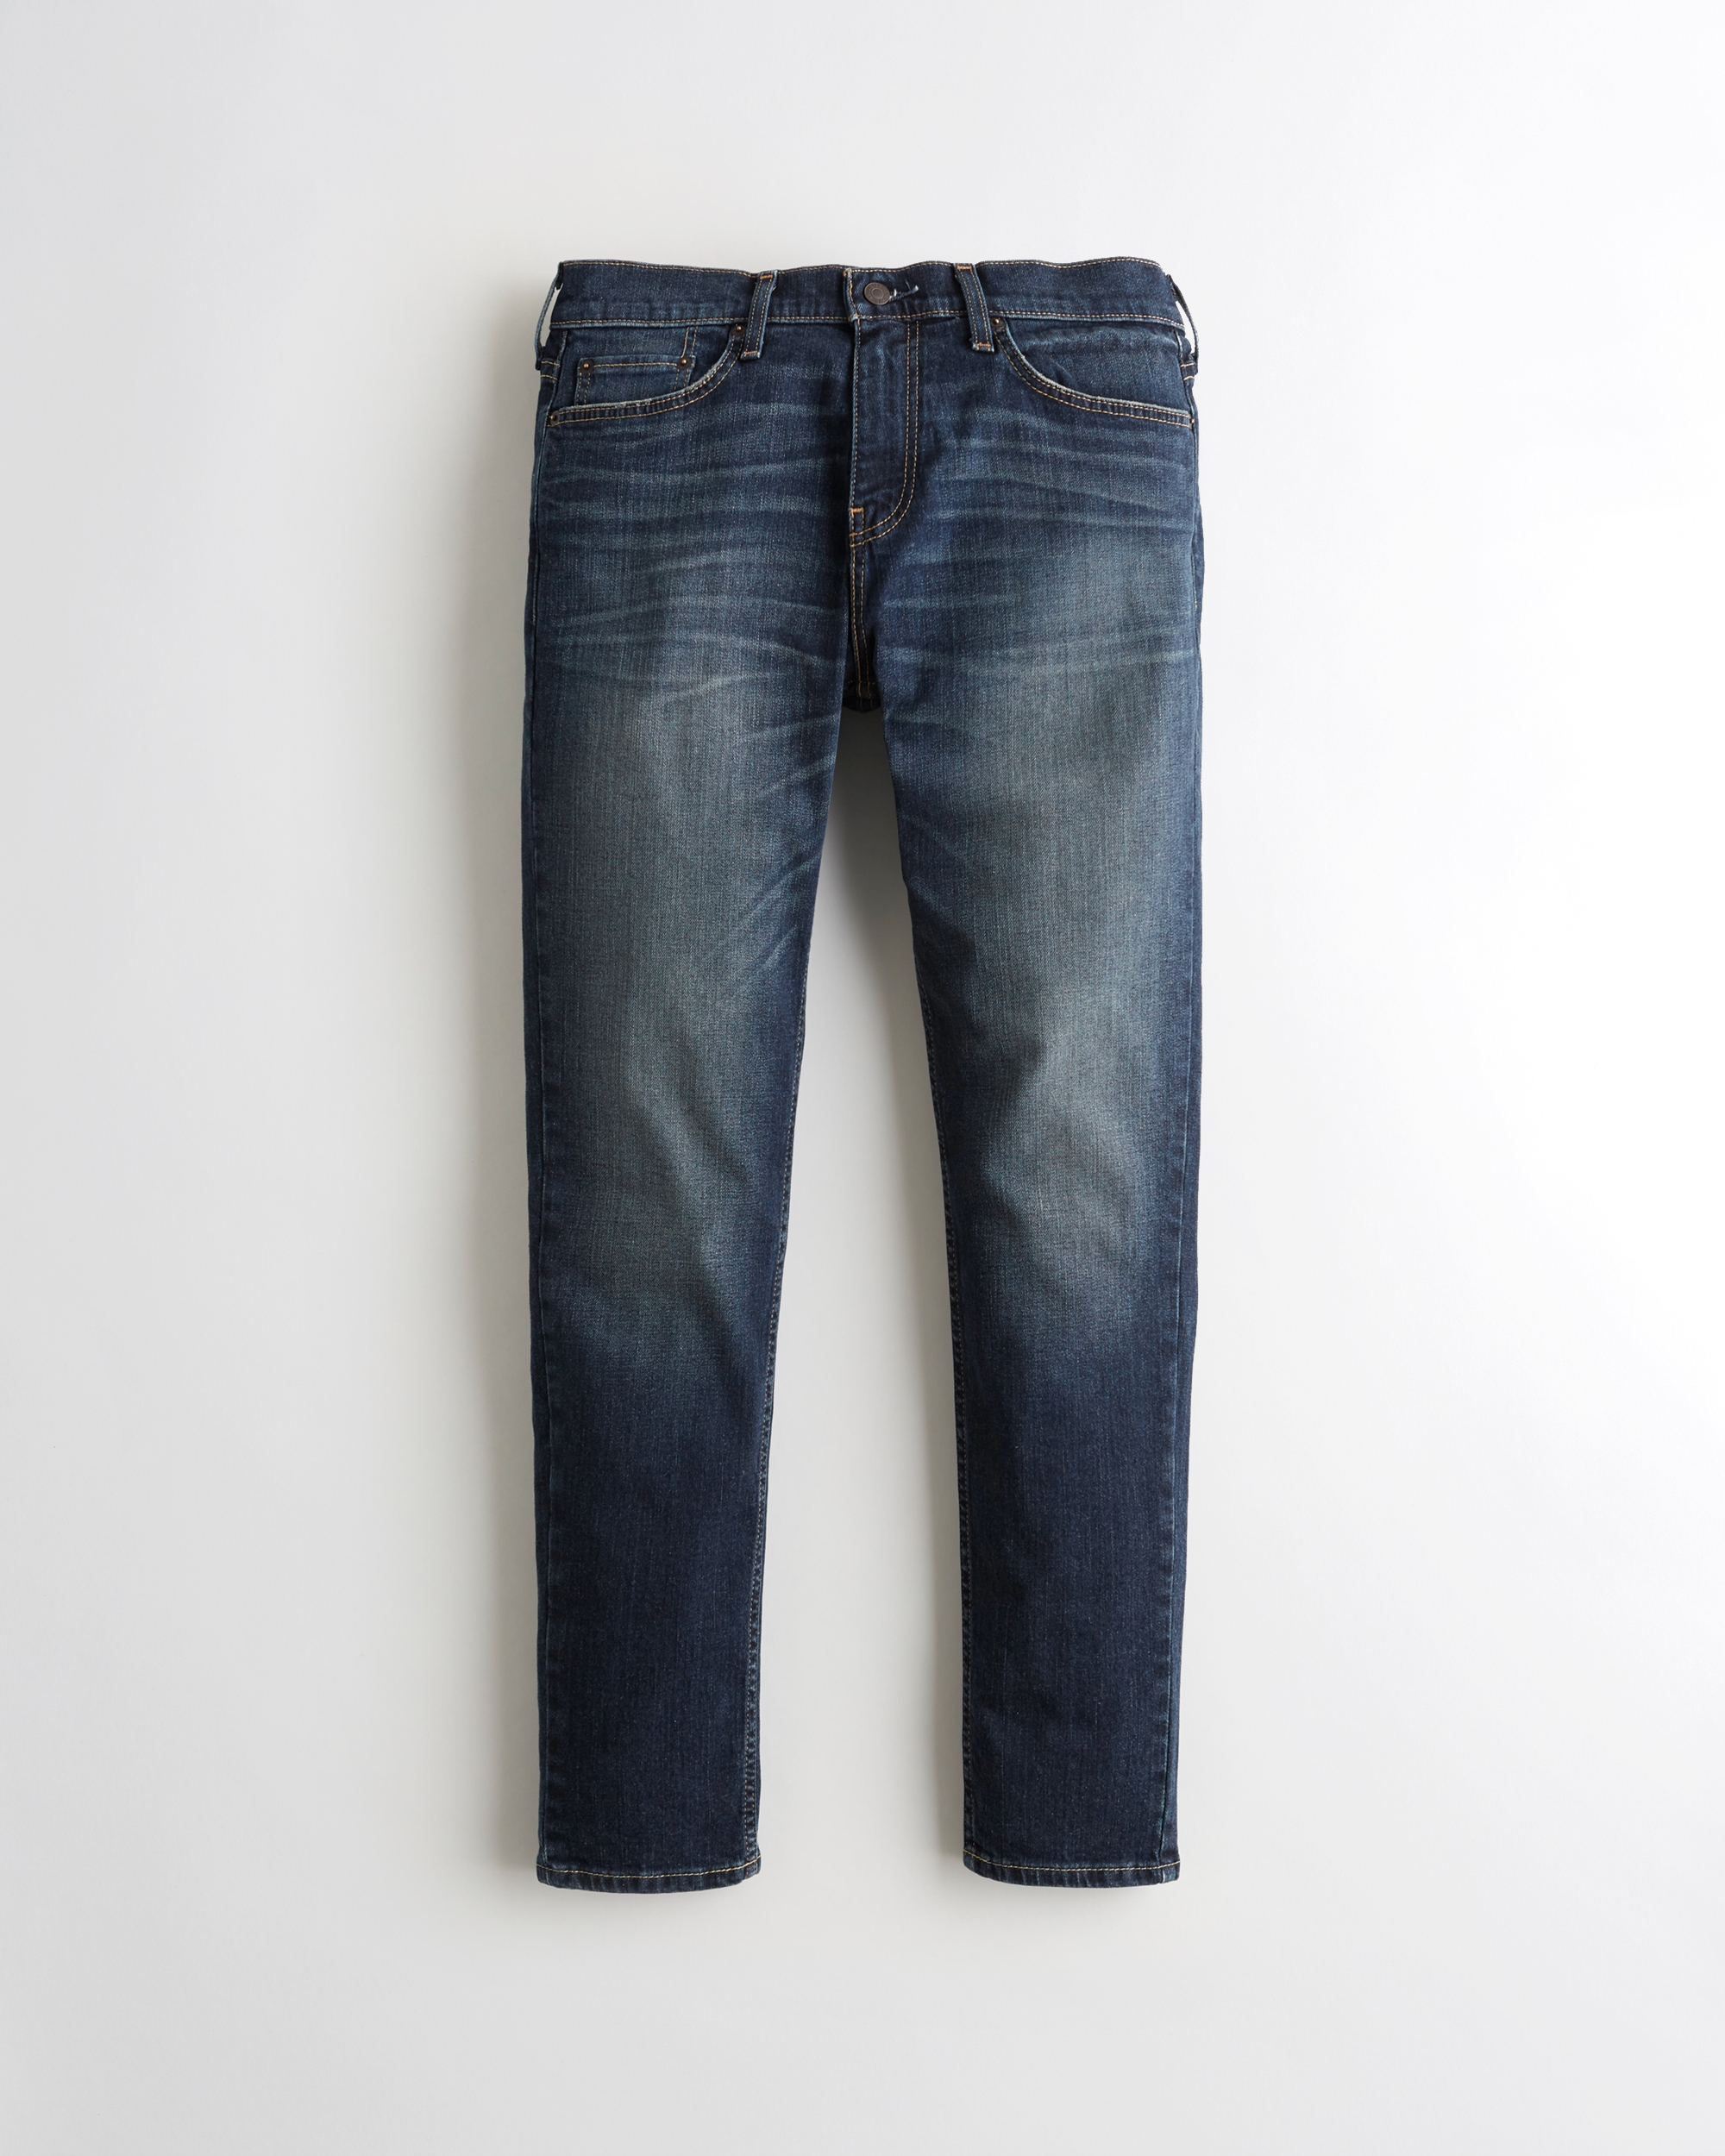 hollister jeans for guys